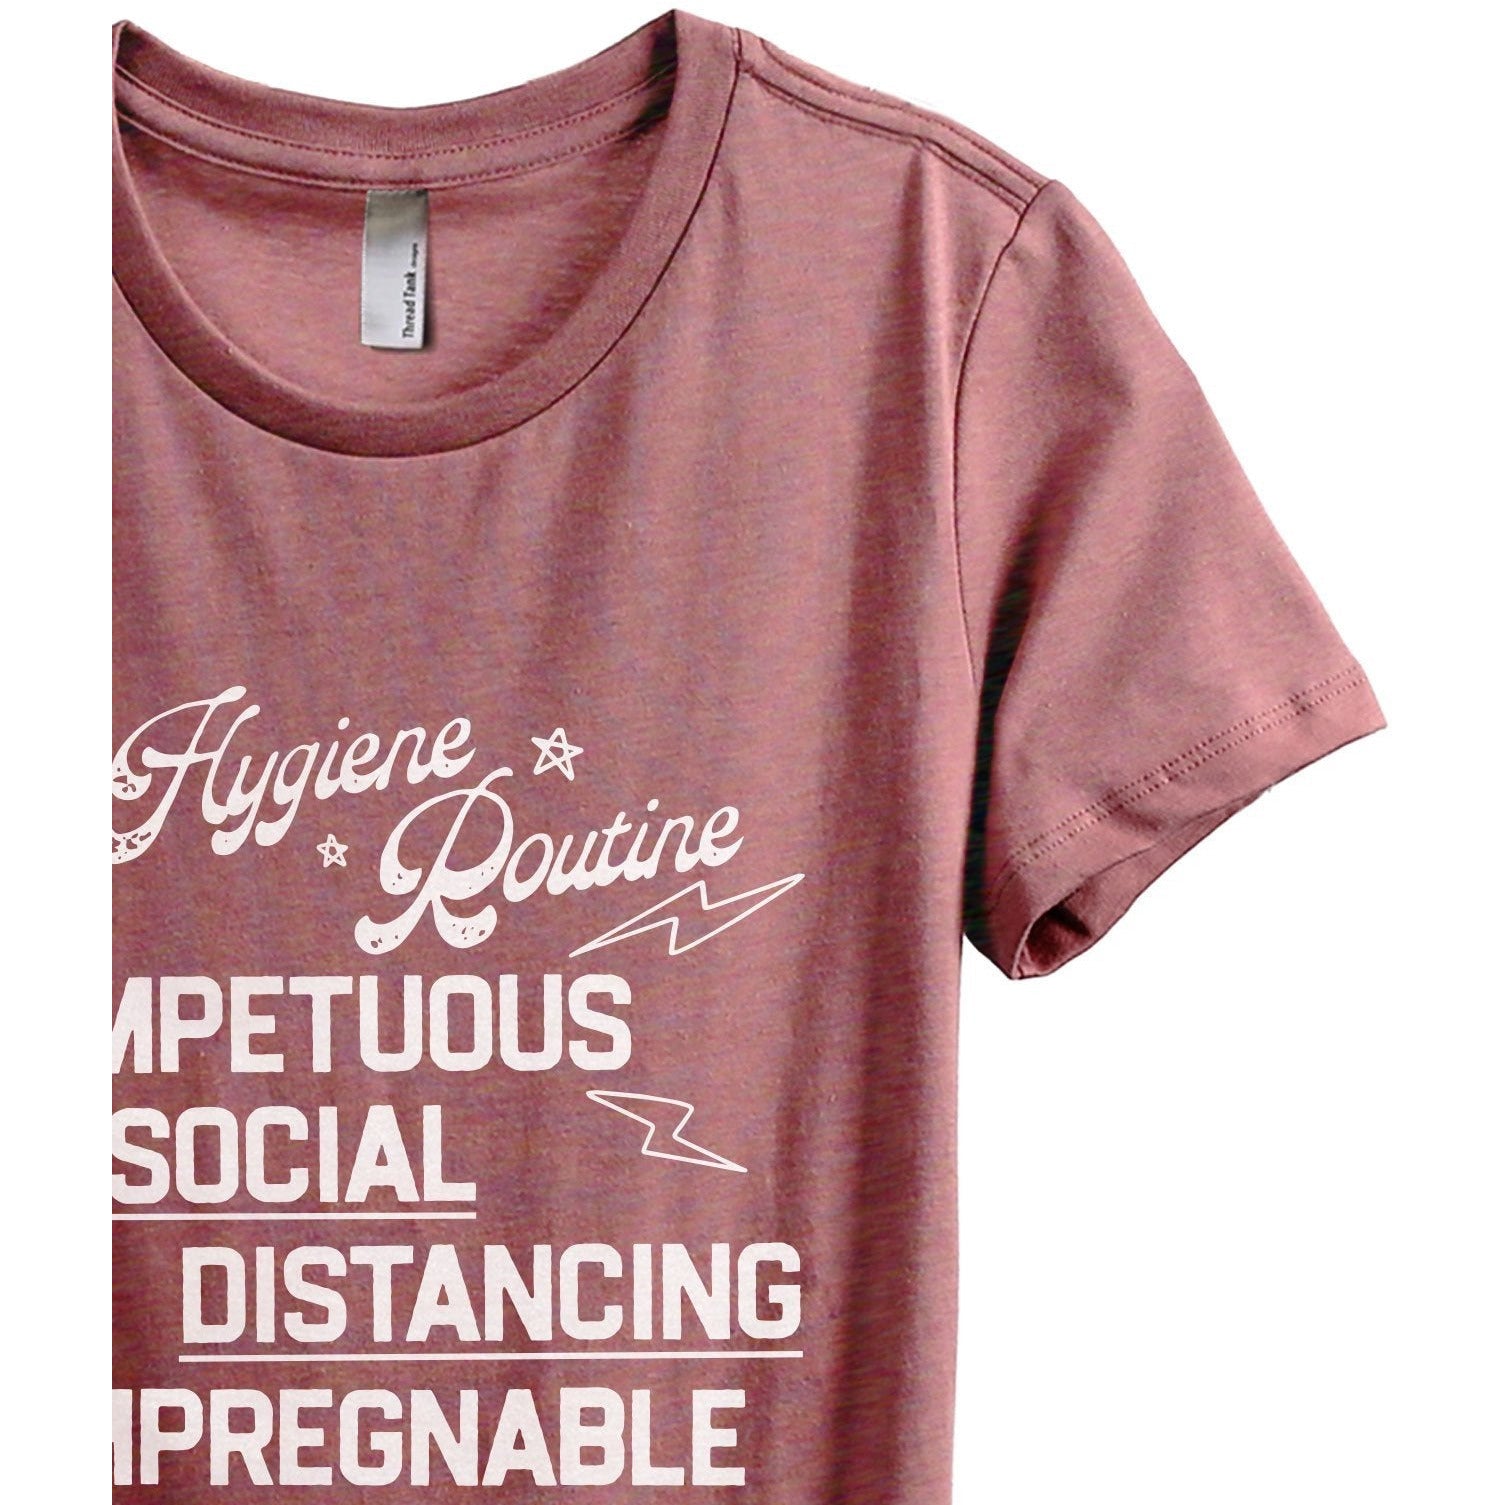 Hygiene Routine Impetuous Women's Relaxed Crewneck T-Shirt Top Tee Heather Rouge Zoom Details
